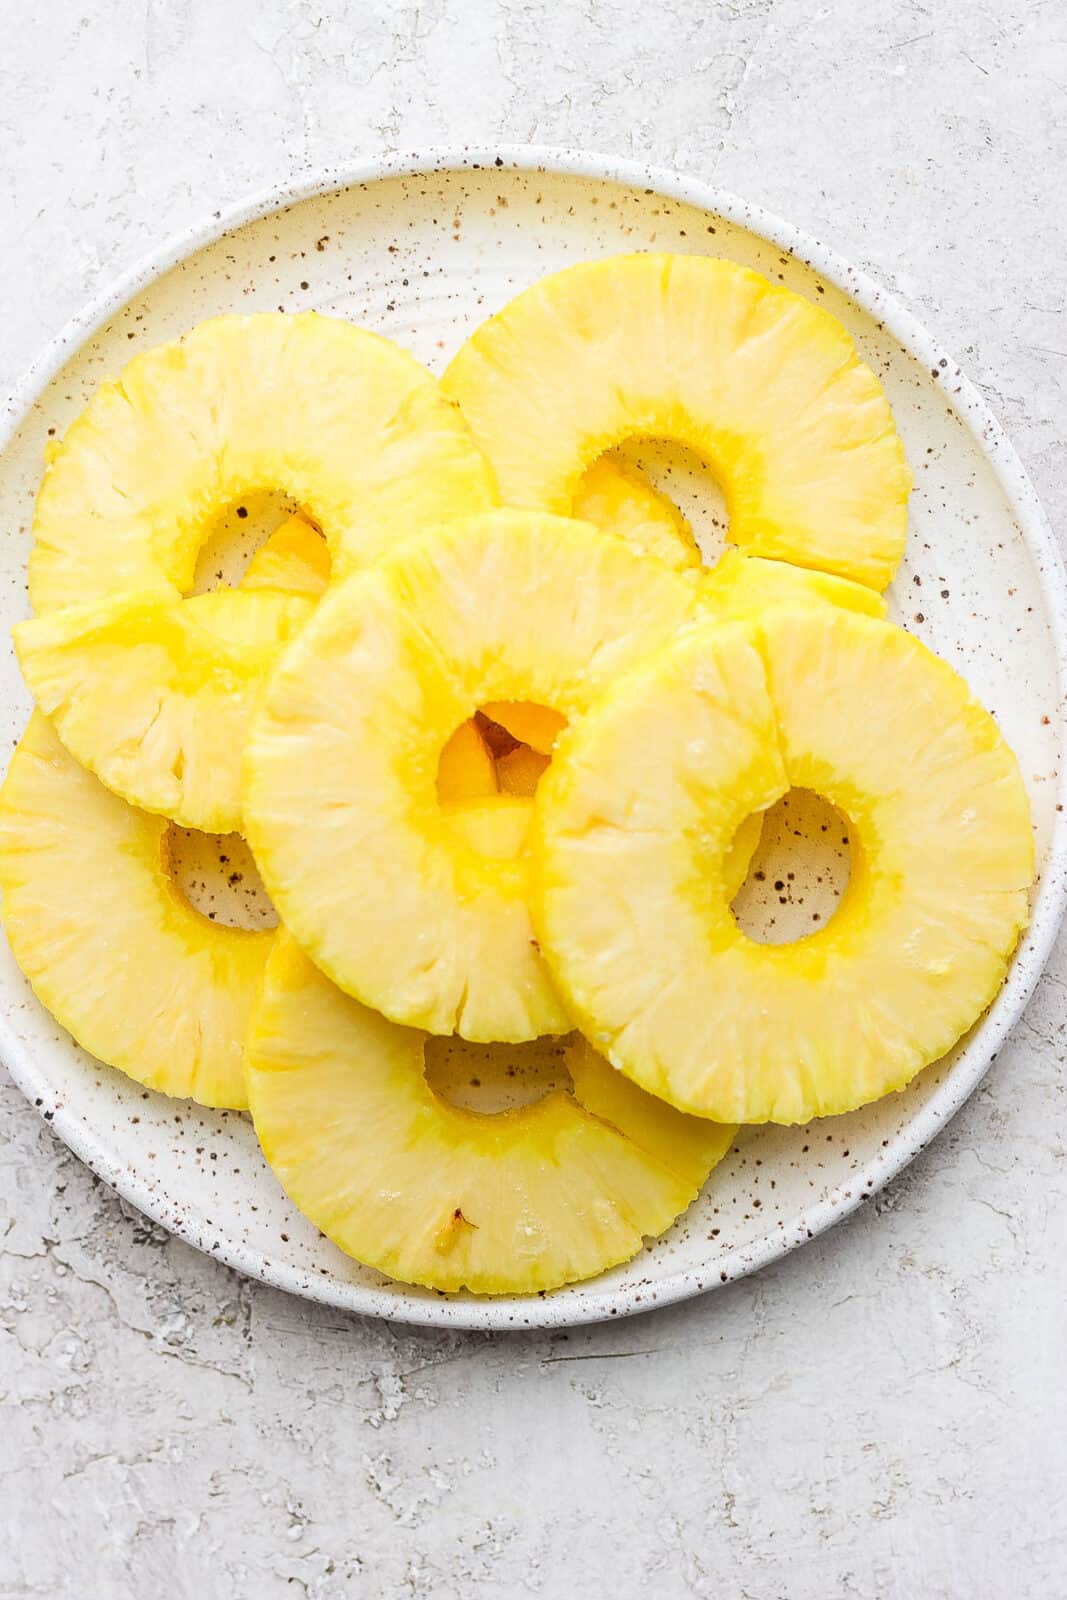 Pineapple slices on a plate.